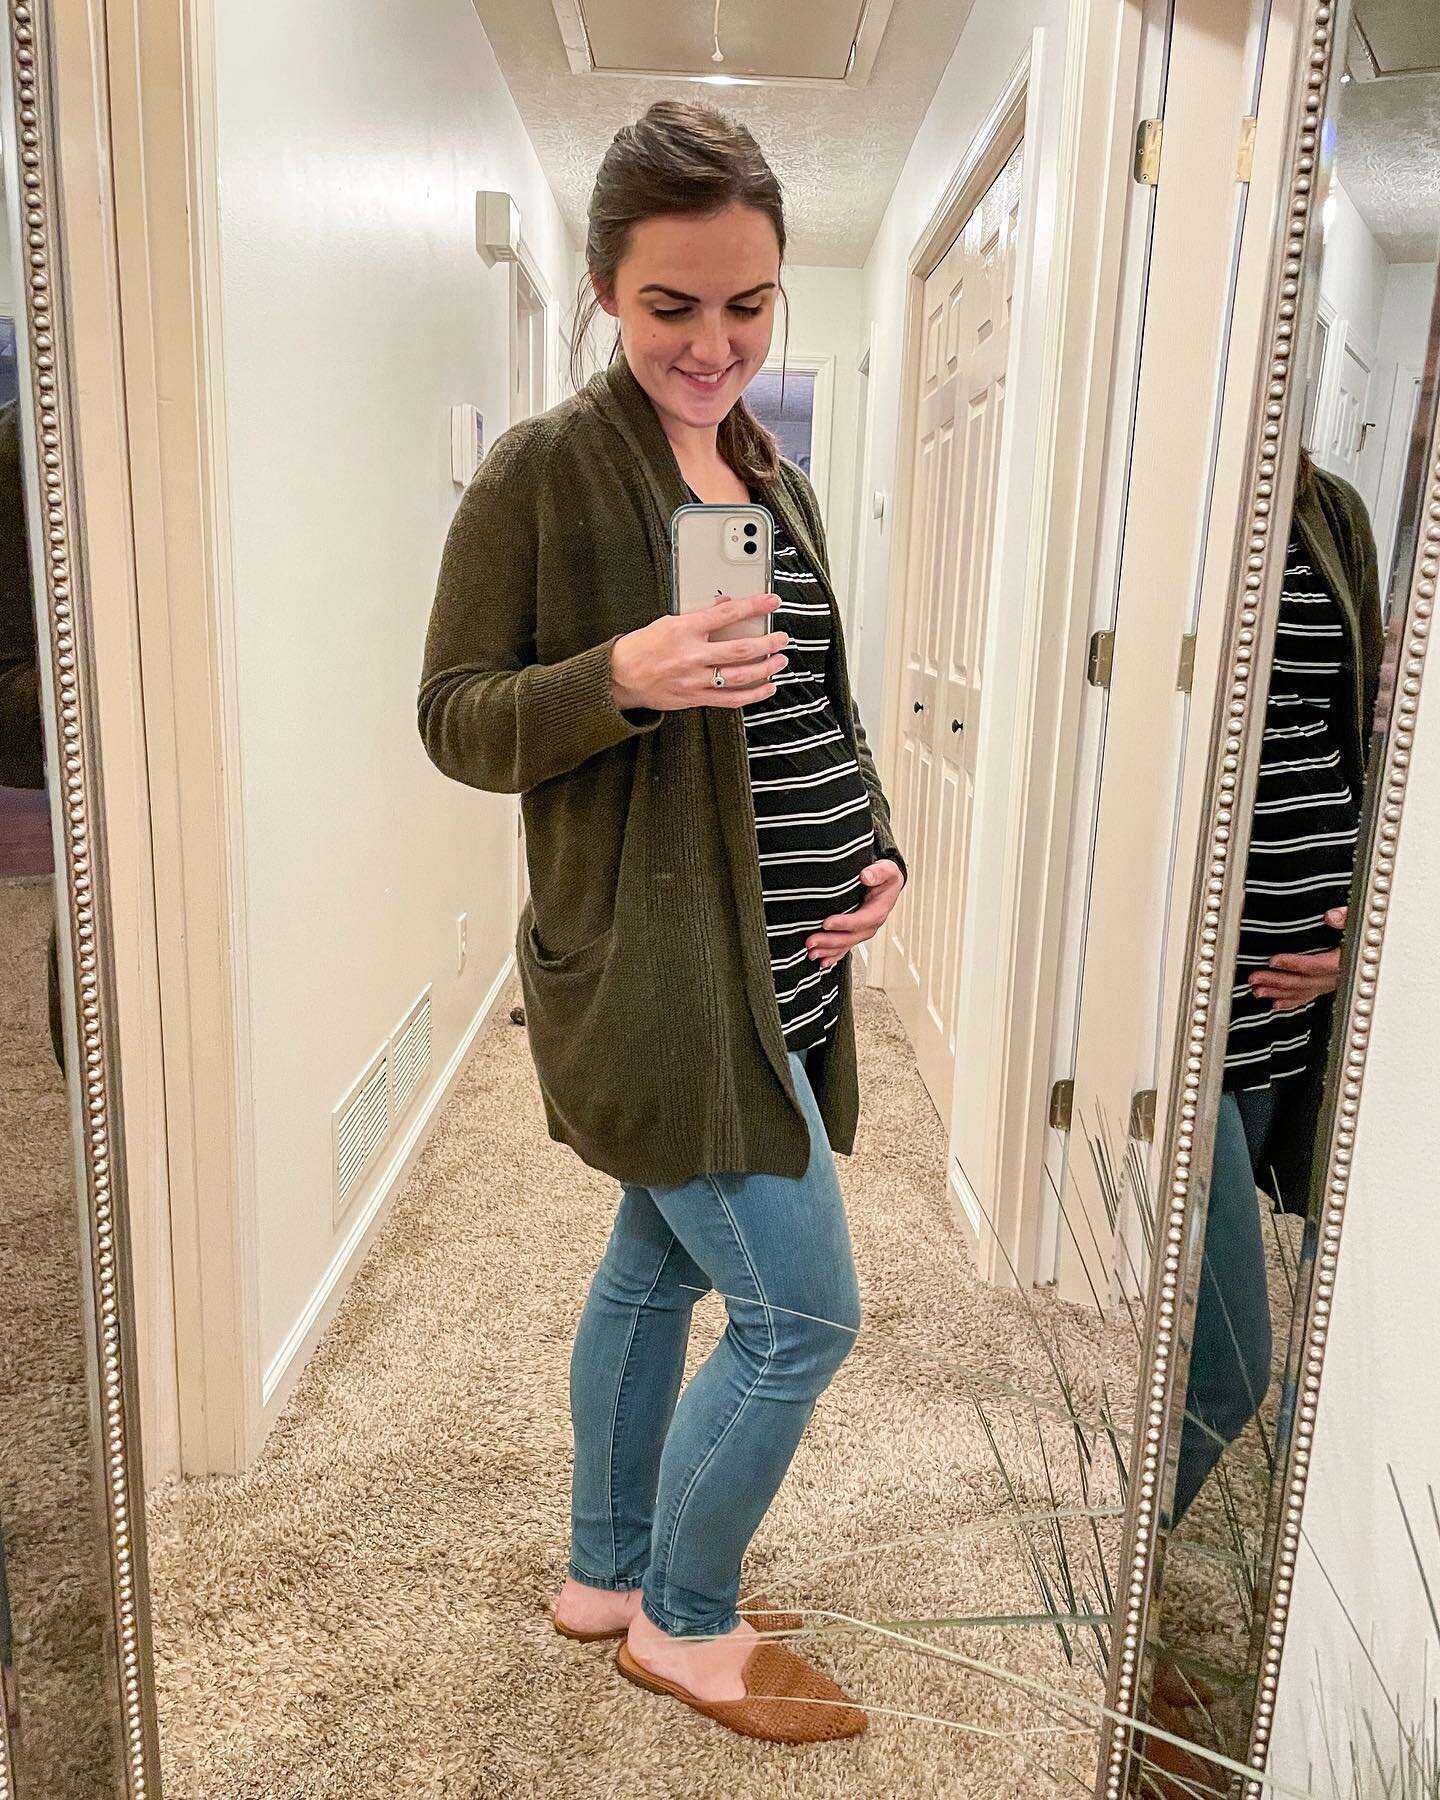 20 weeks today! Halfway to meeting baby #3! So crazy!! ❤️ Excited for the anatomy scan this week and the gift of Charlie getting to come with me!🙌🏻